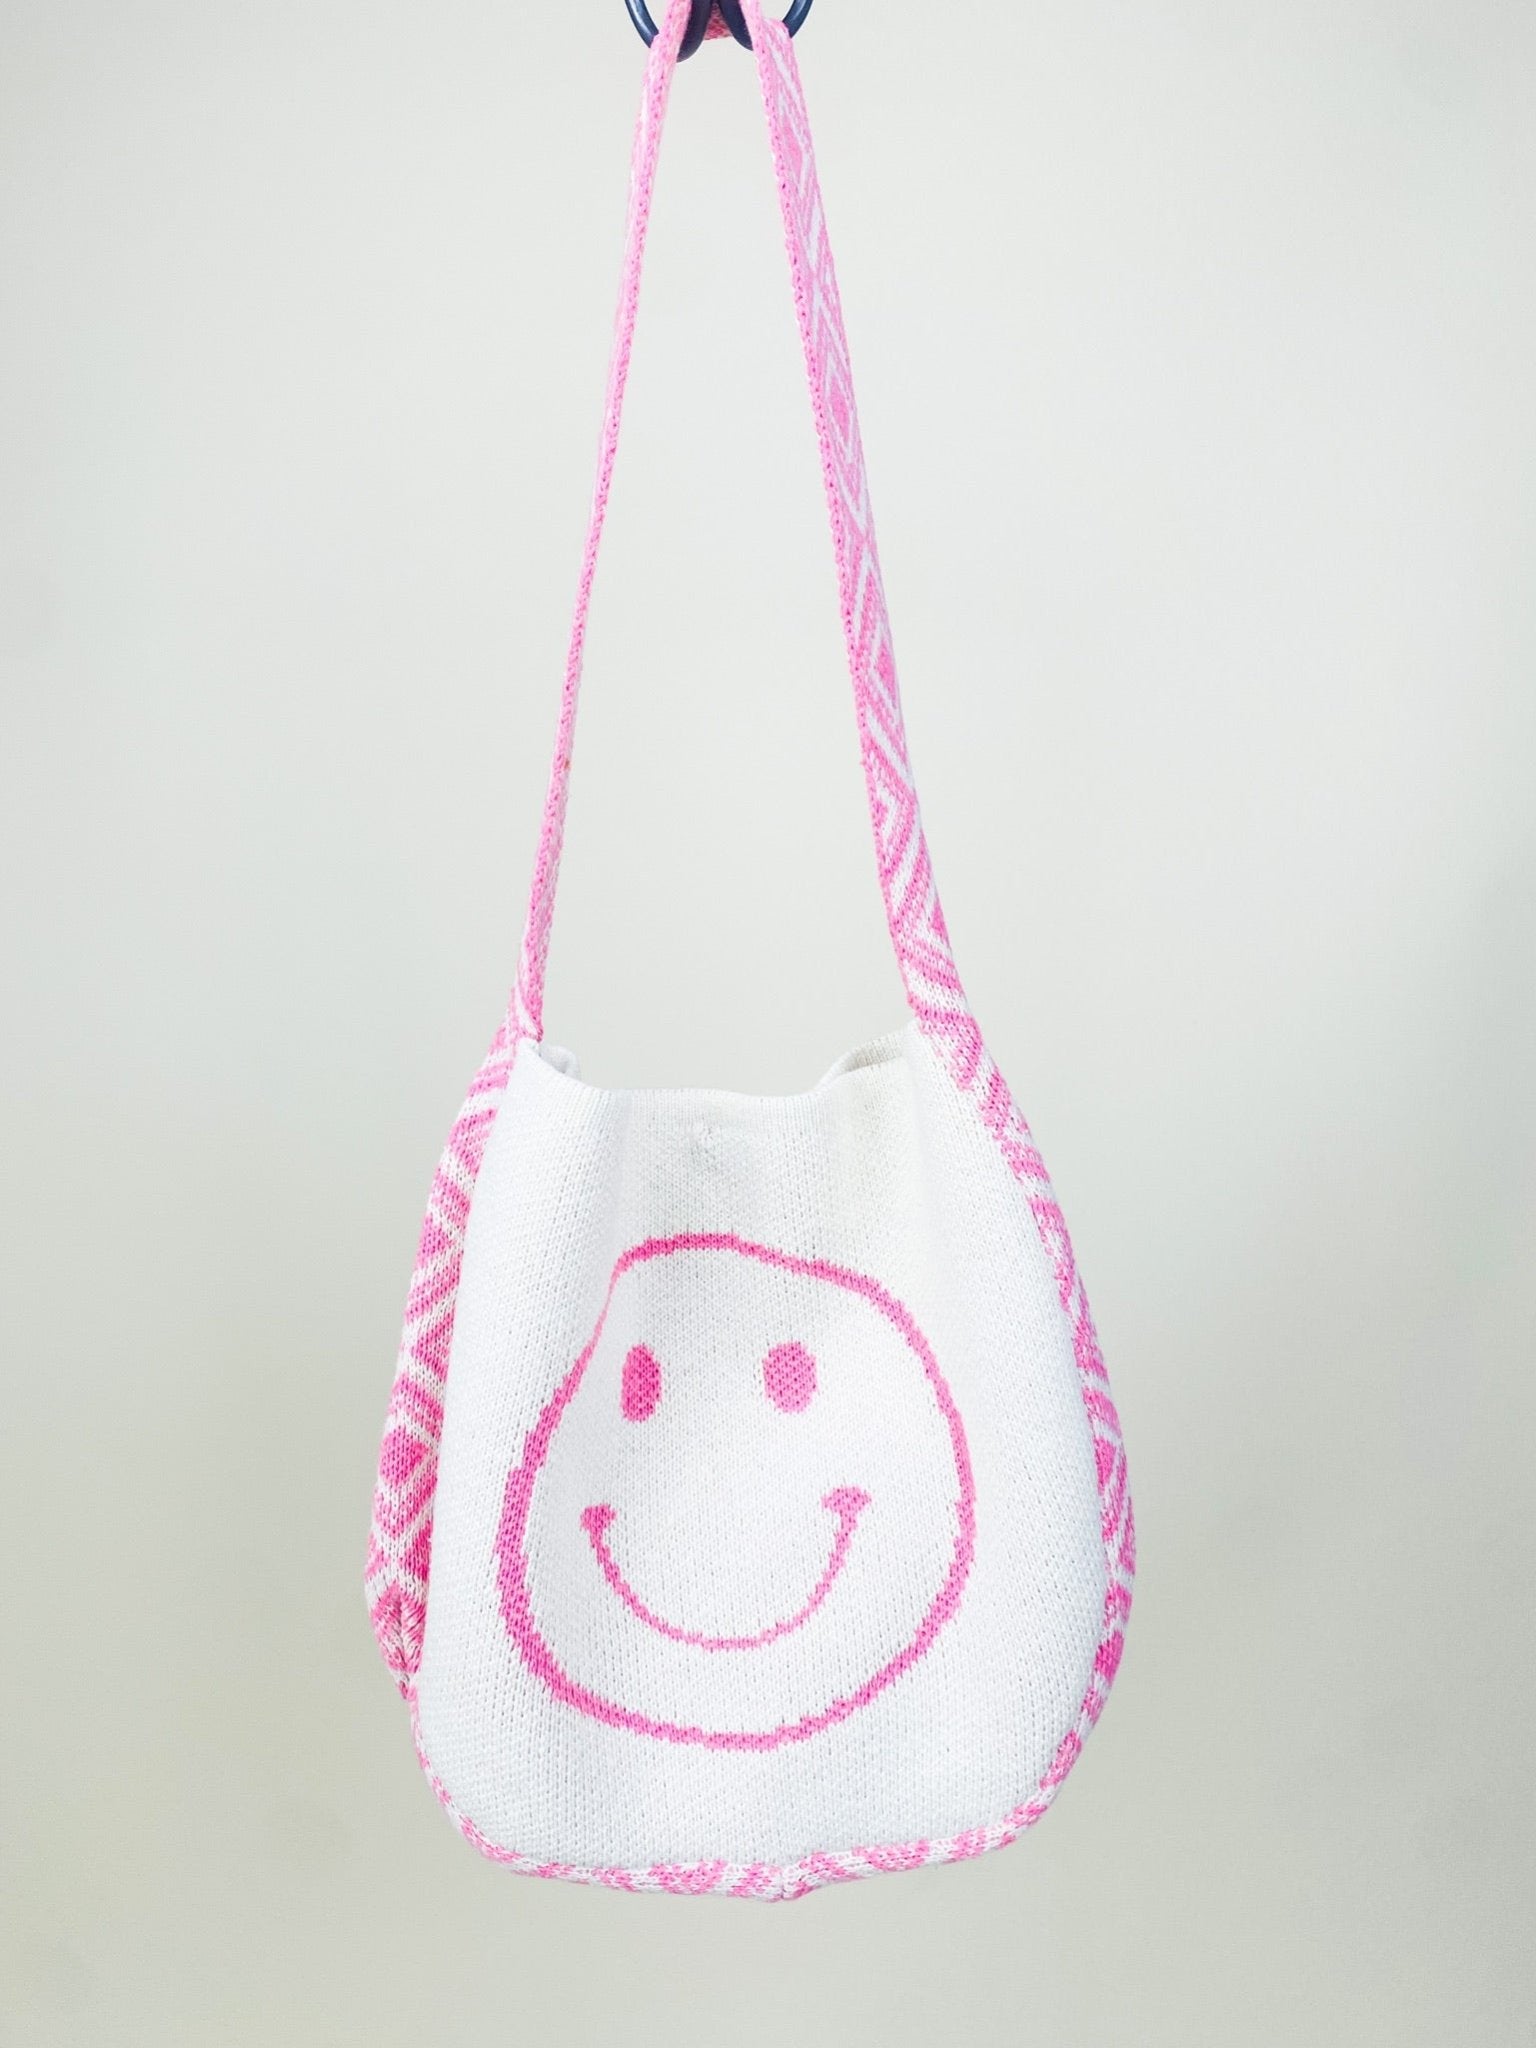 Smiley face geo woven bag pink - Stylish bag - Trendy Summer Lake T-Shirts and Tank Tops at Lush Fashion Lounge Boutique in Oklahoma City